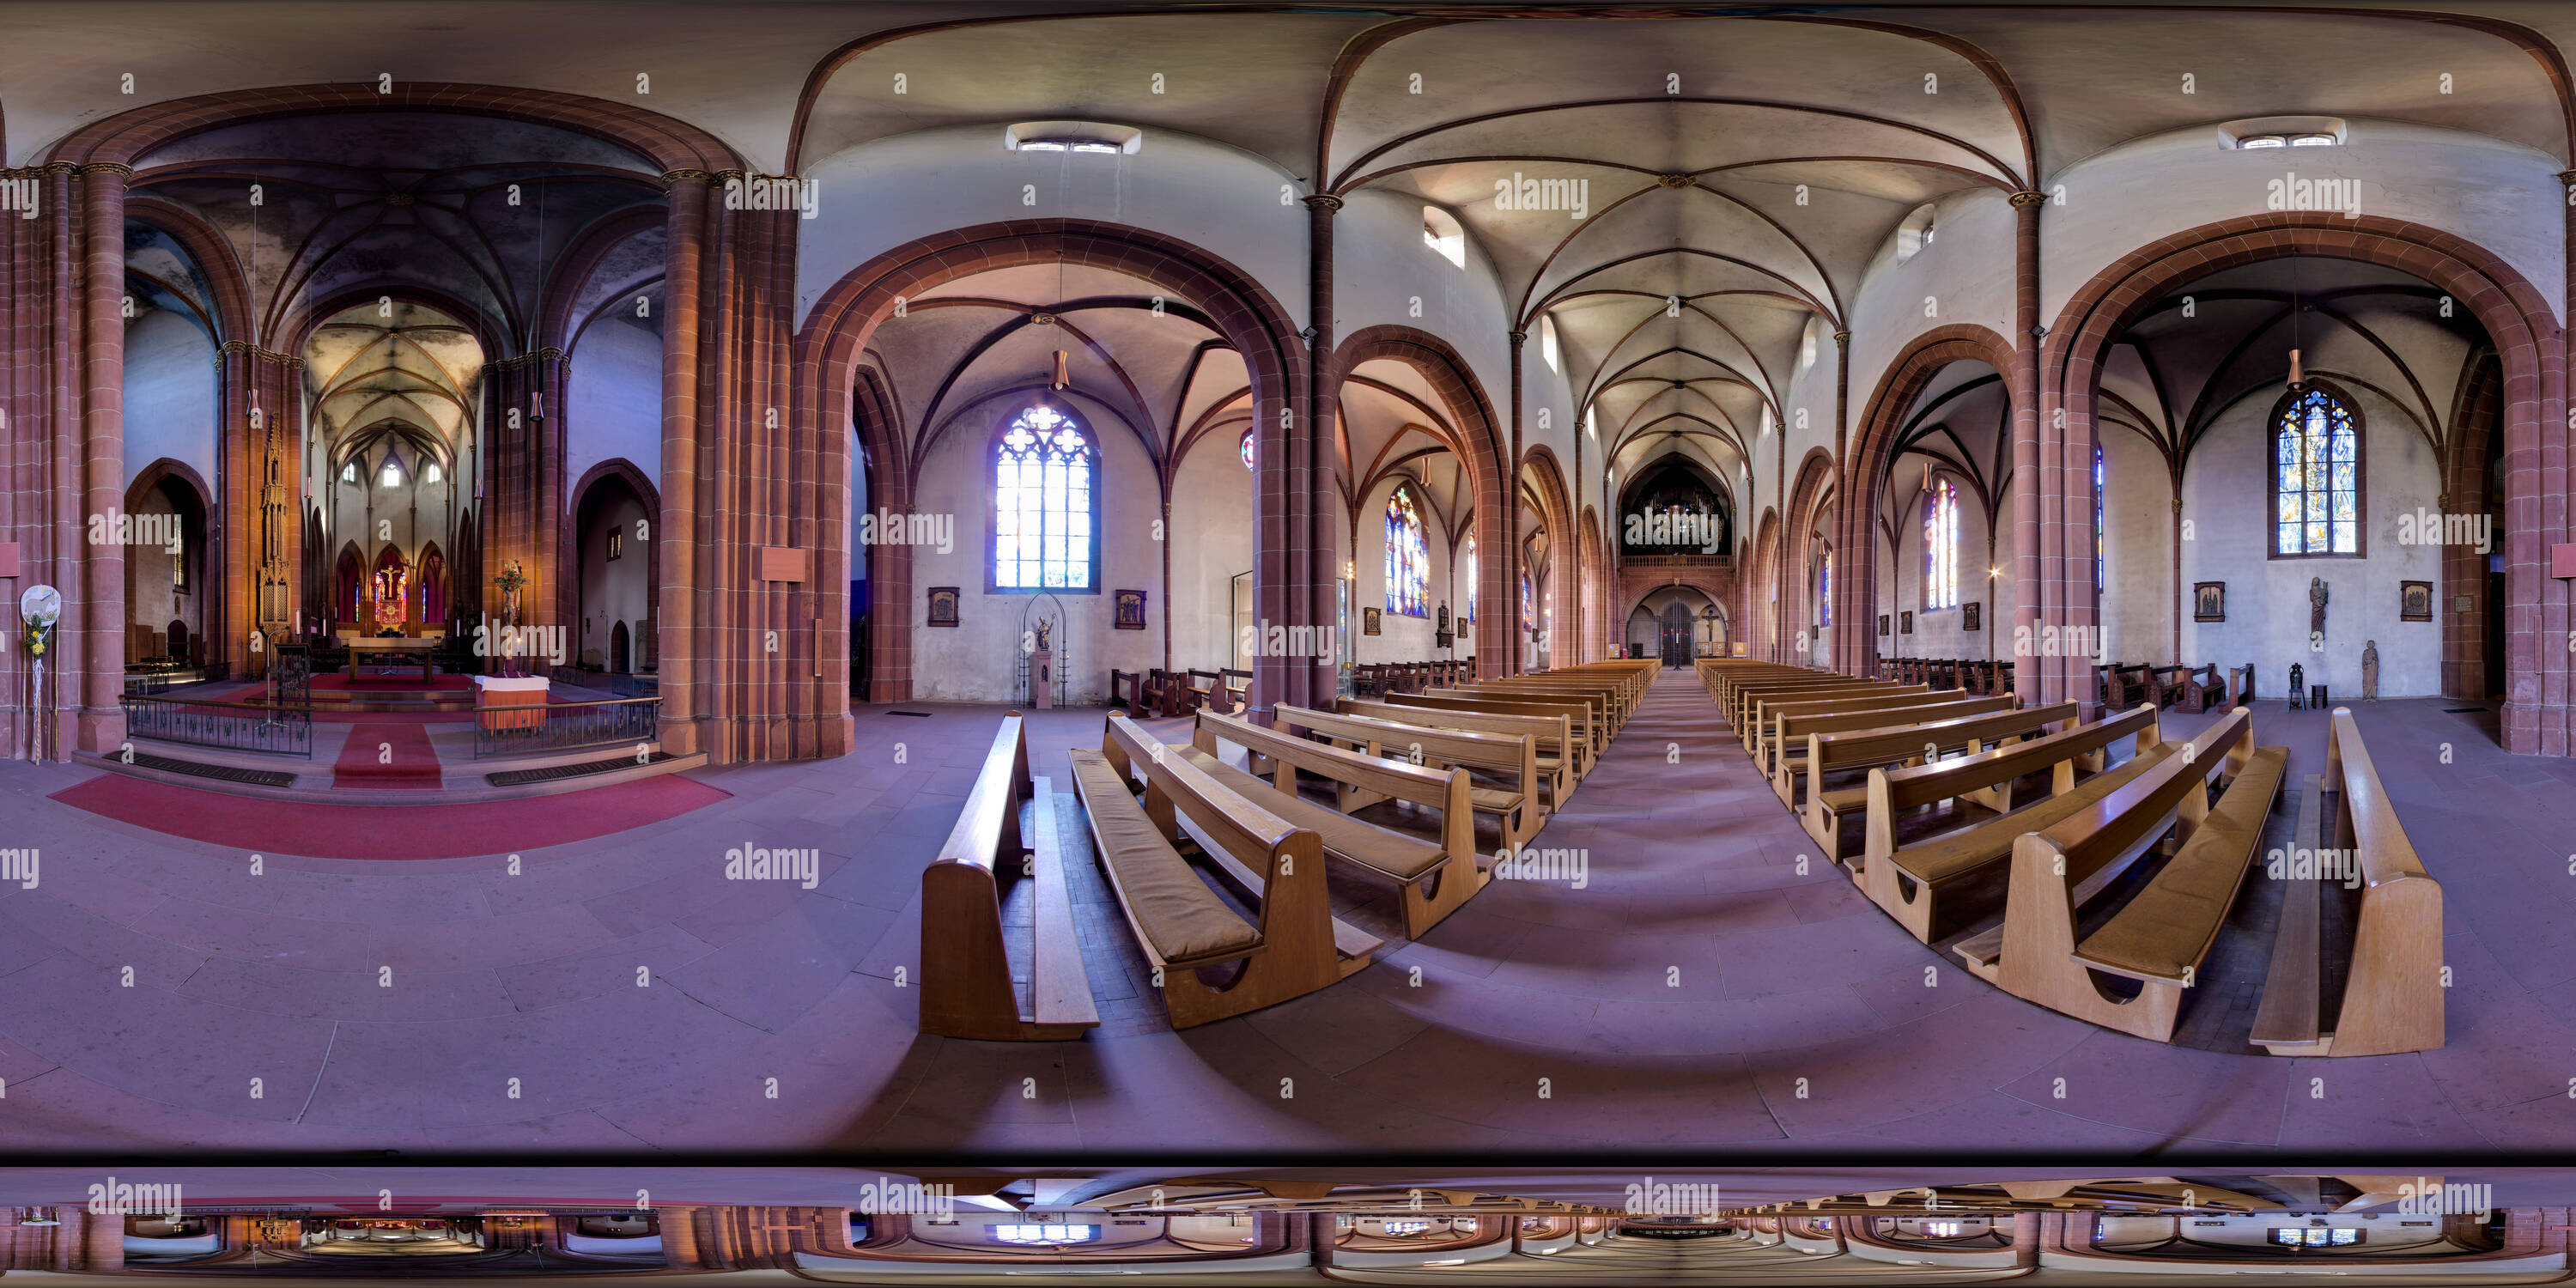 360 degree panoramic view of Liebfrauenkirche (Church of our Dear Lady) Worms, Main Aisle (II), 2017-04